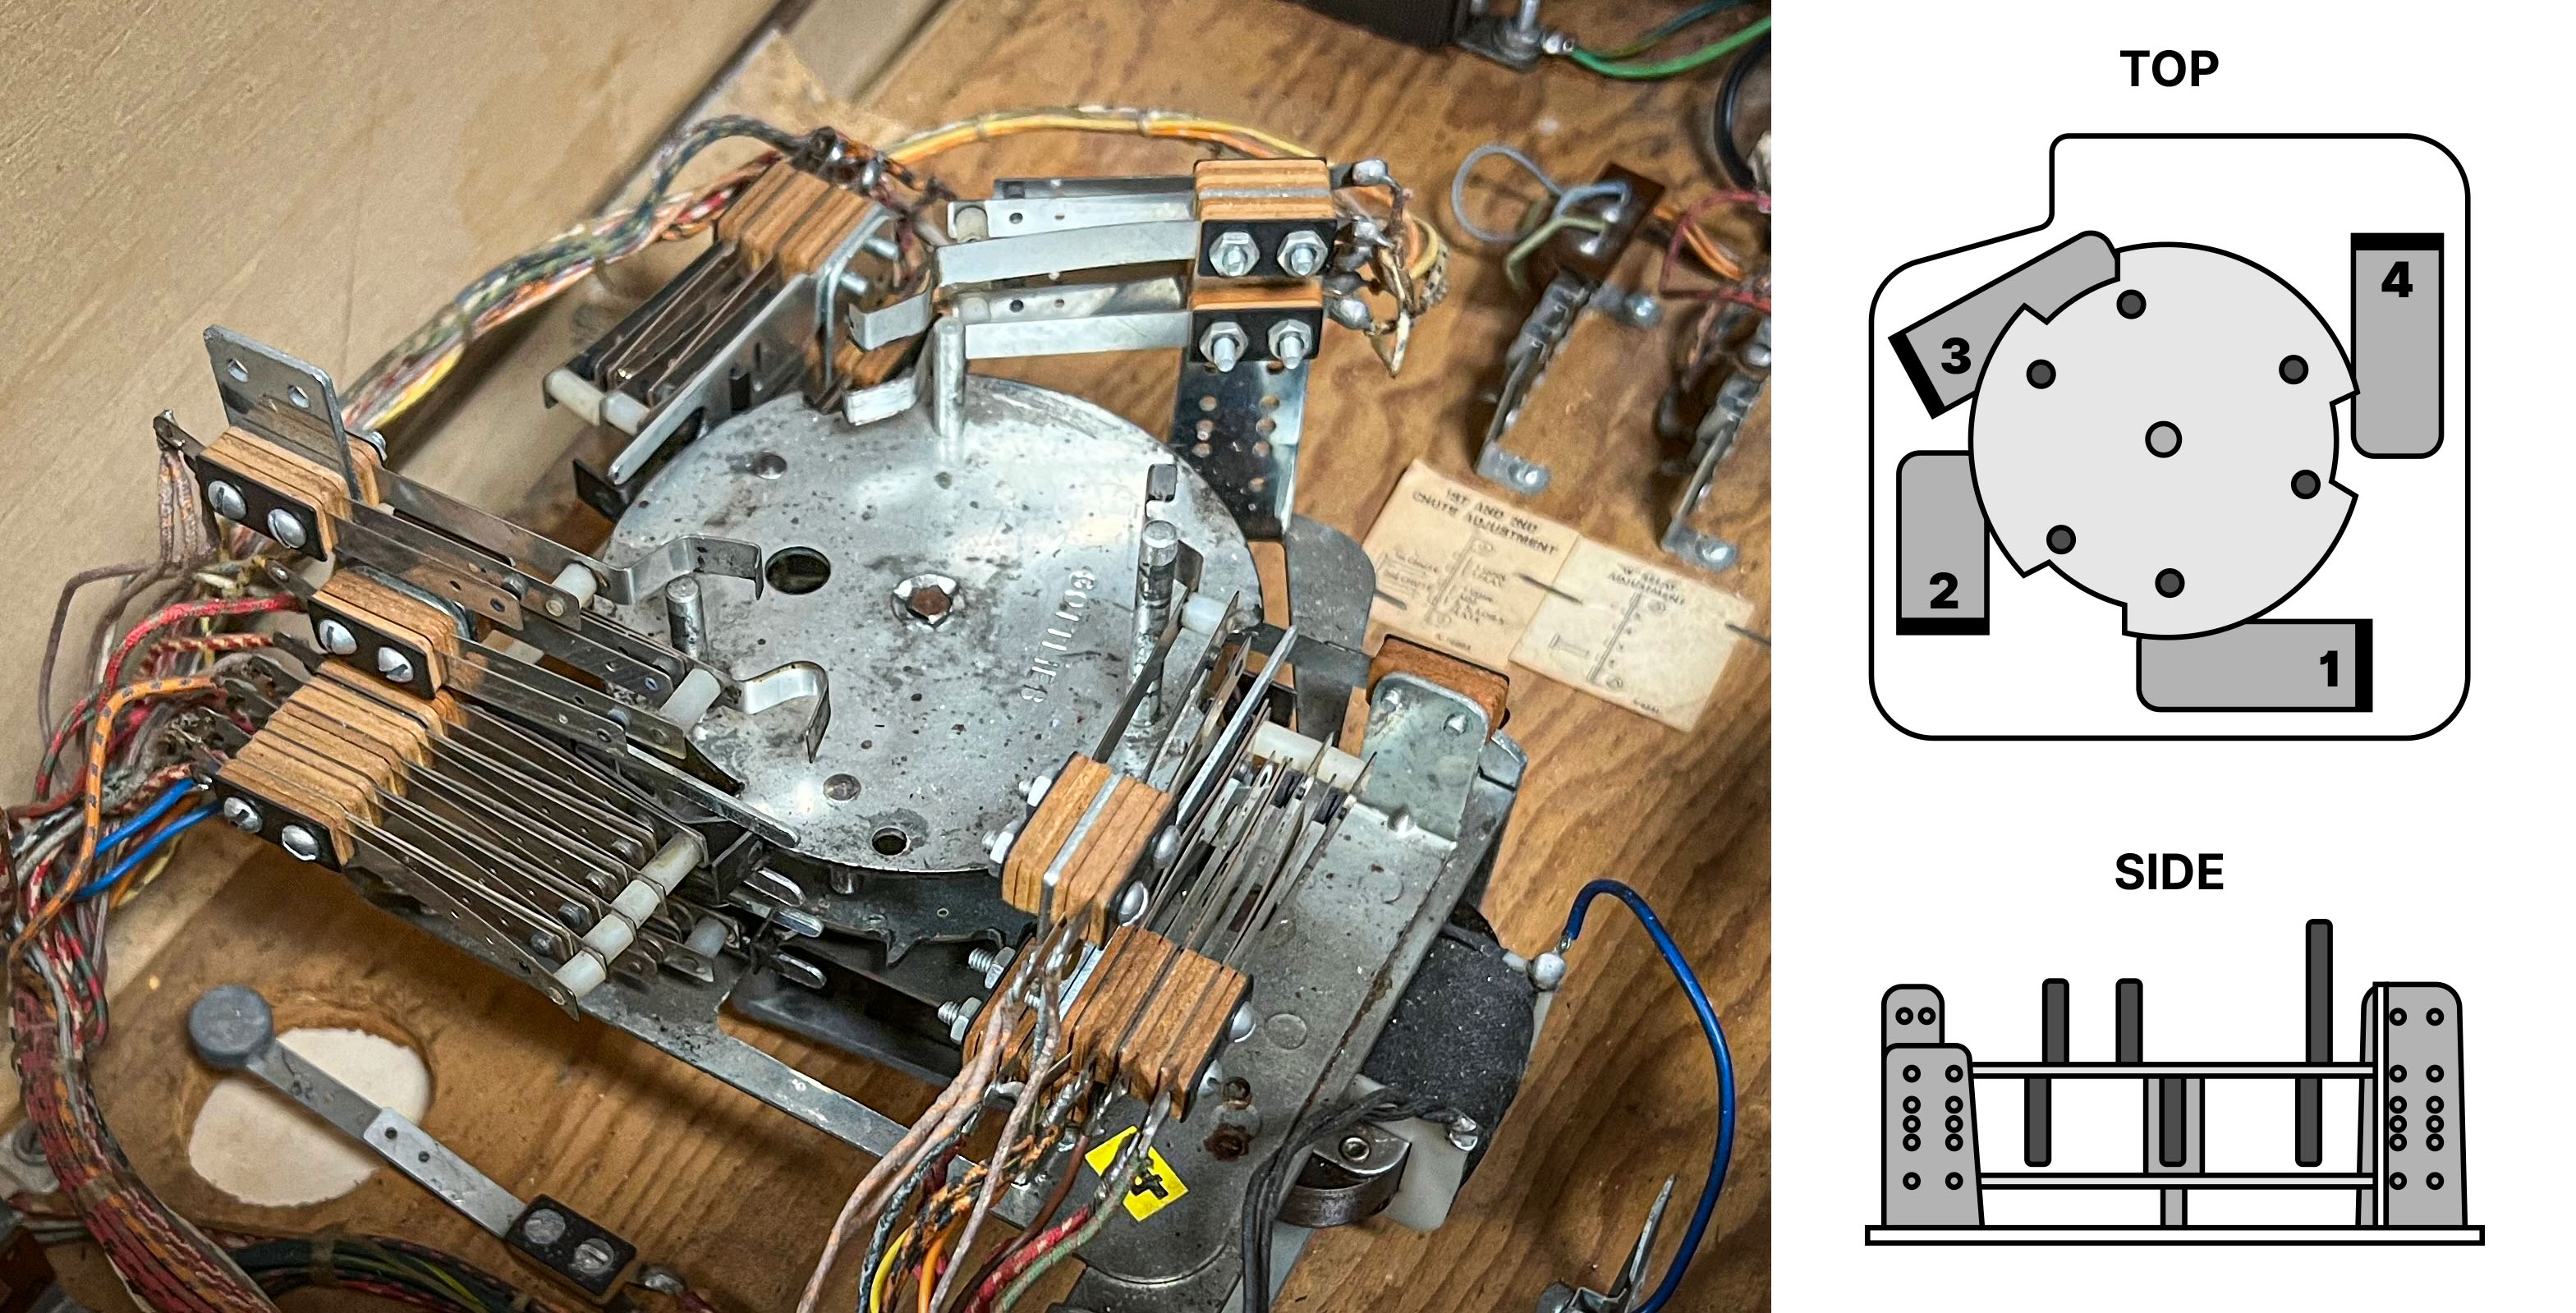 Photo and schema of a score motor